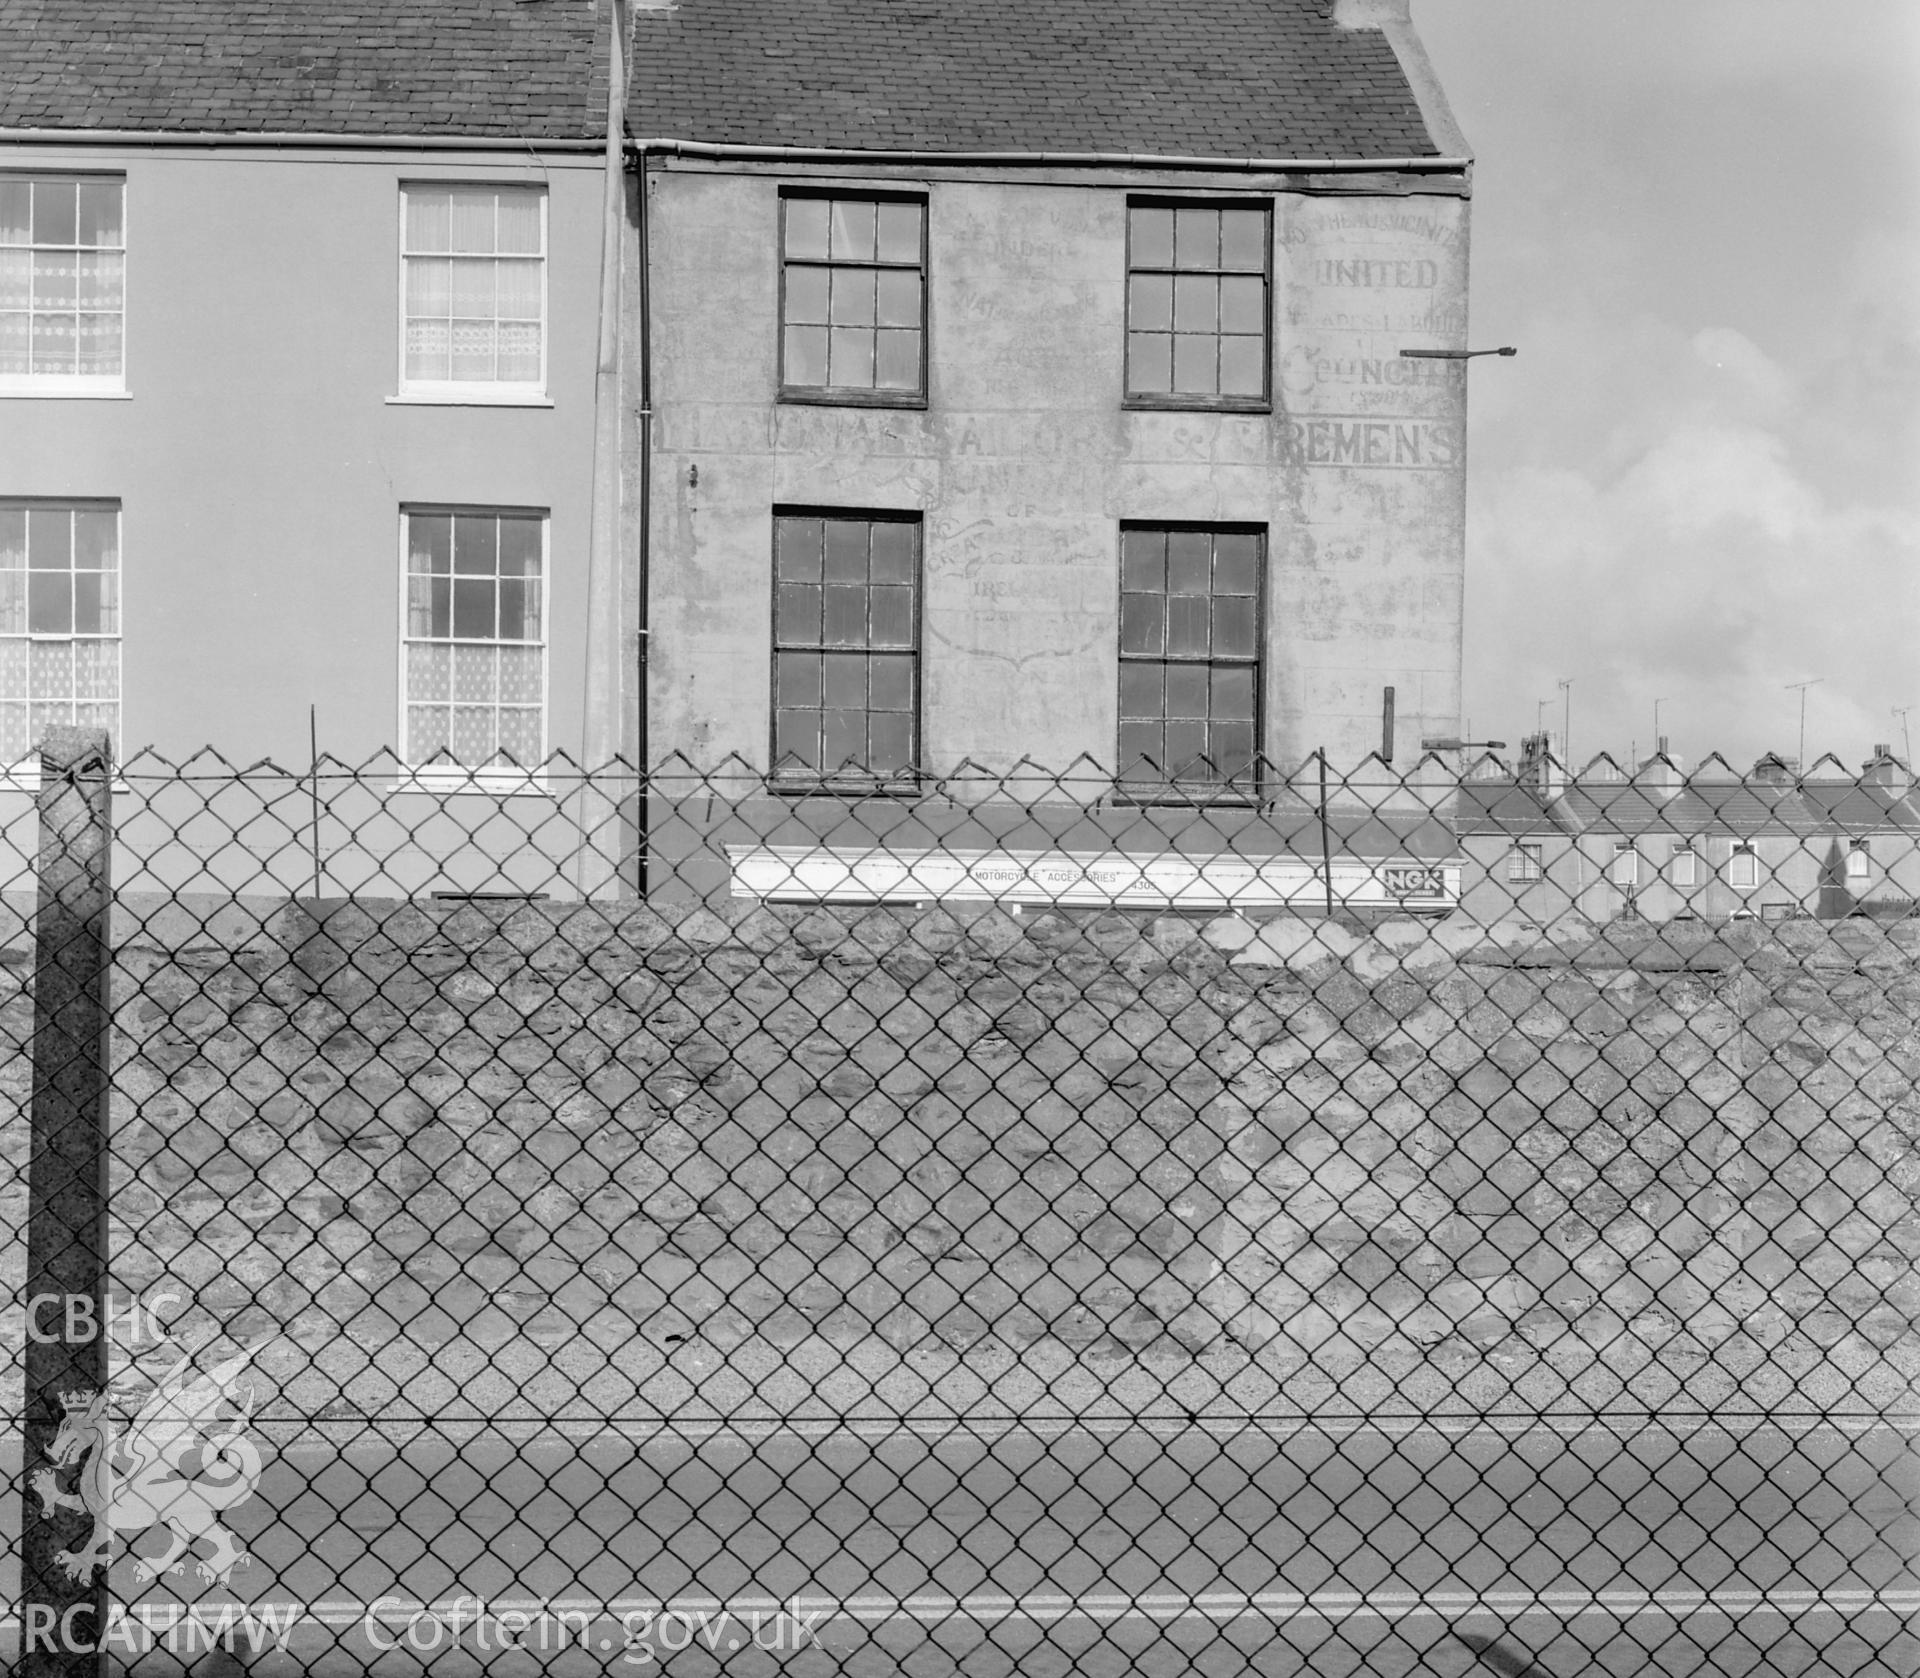 Two black and white photographs of the former Seamen's Union, Holyhead.